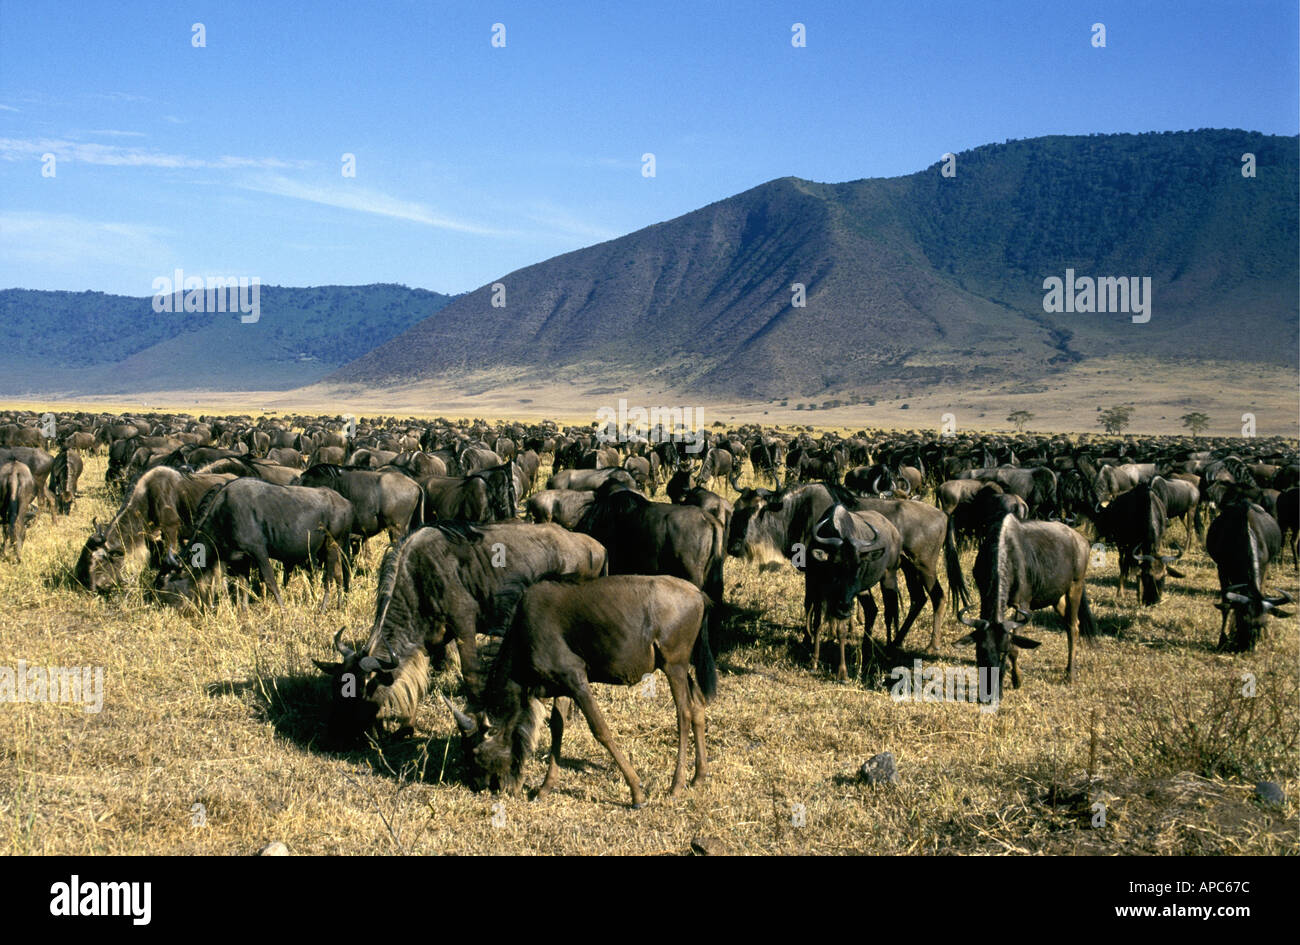 A herd of several thousand wildebeest or White Bearded Gnu in Ngorongoro Crater Tanzania East Africa Stock Photo